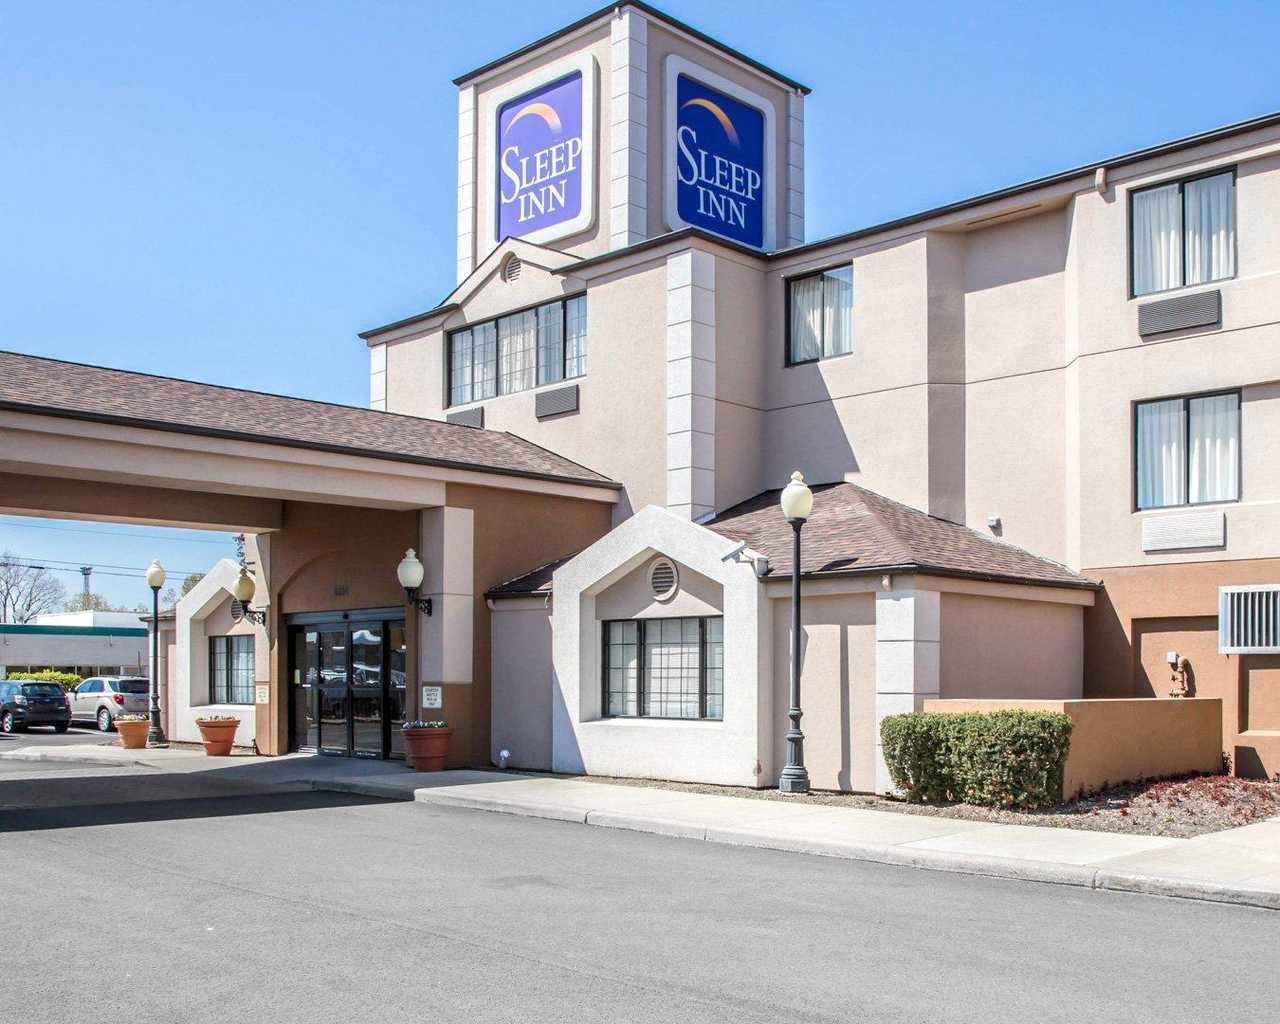 Photo of Sleep Inn Midway Airport, Bedford Park, IL